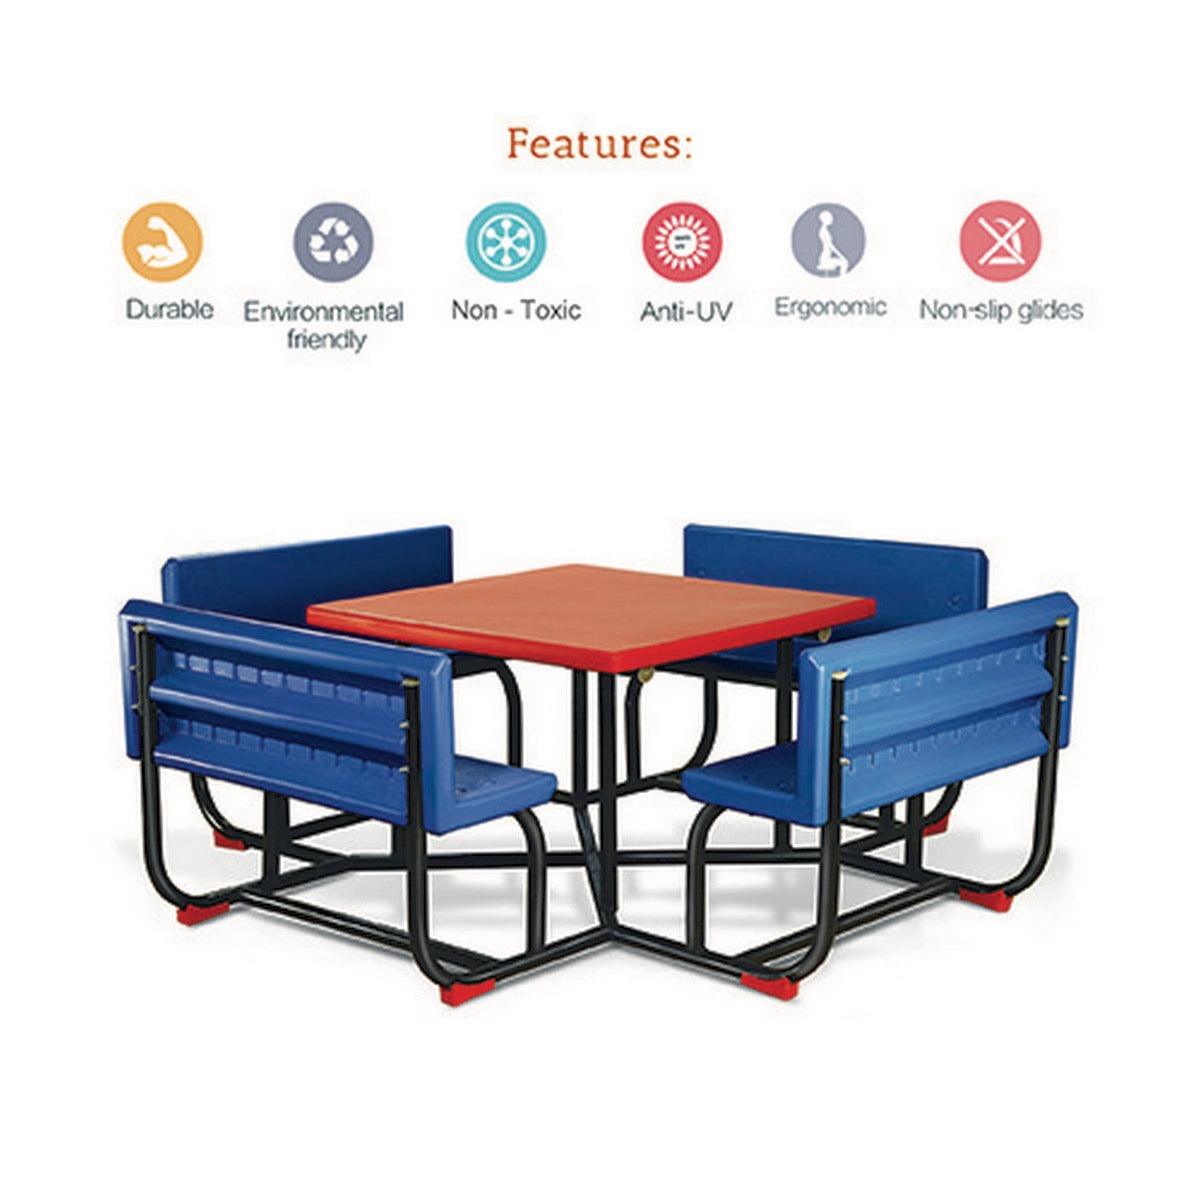 Ok Play Party Time, Seating Capacity Of 8 Children, Perfect For Home And School, Blue & Red, 2 to 4 Years